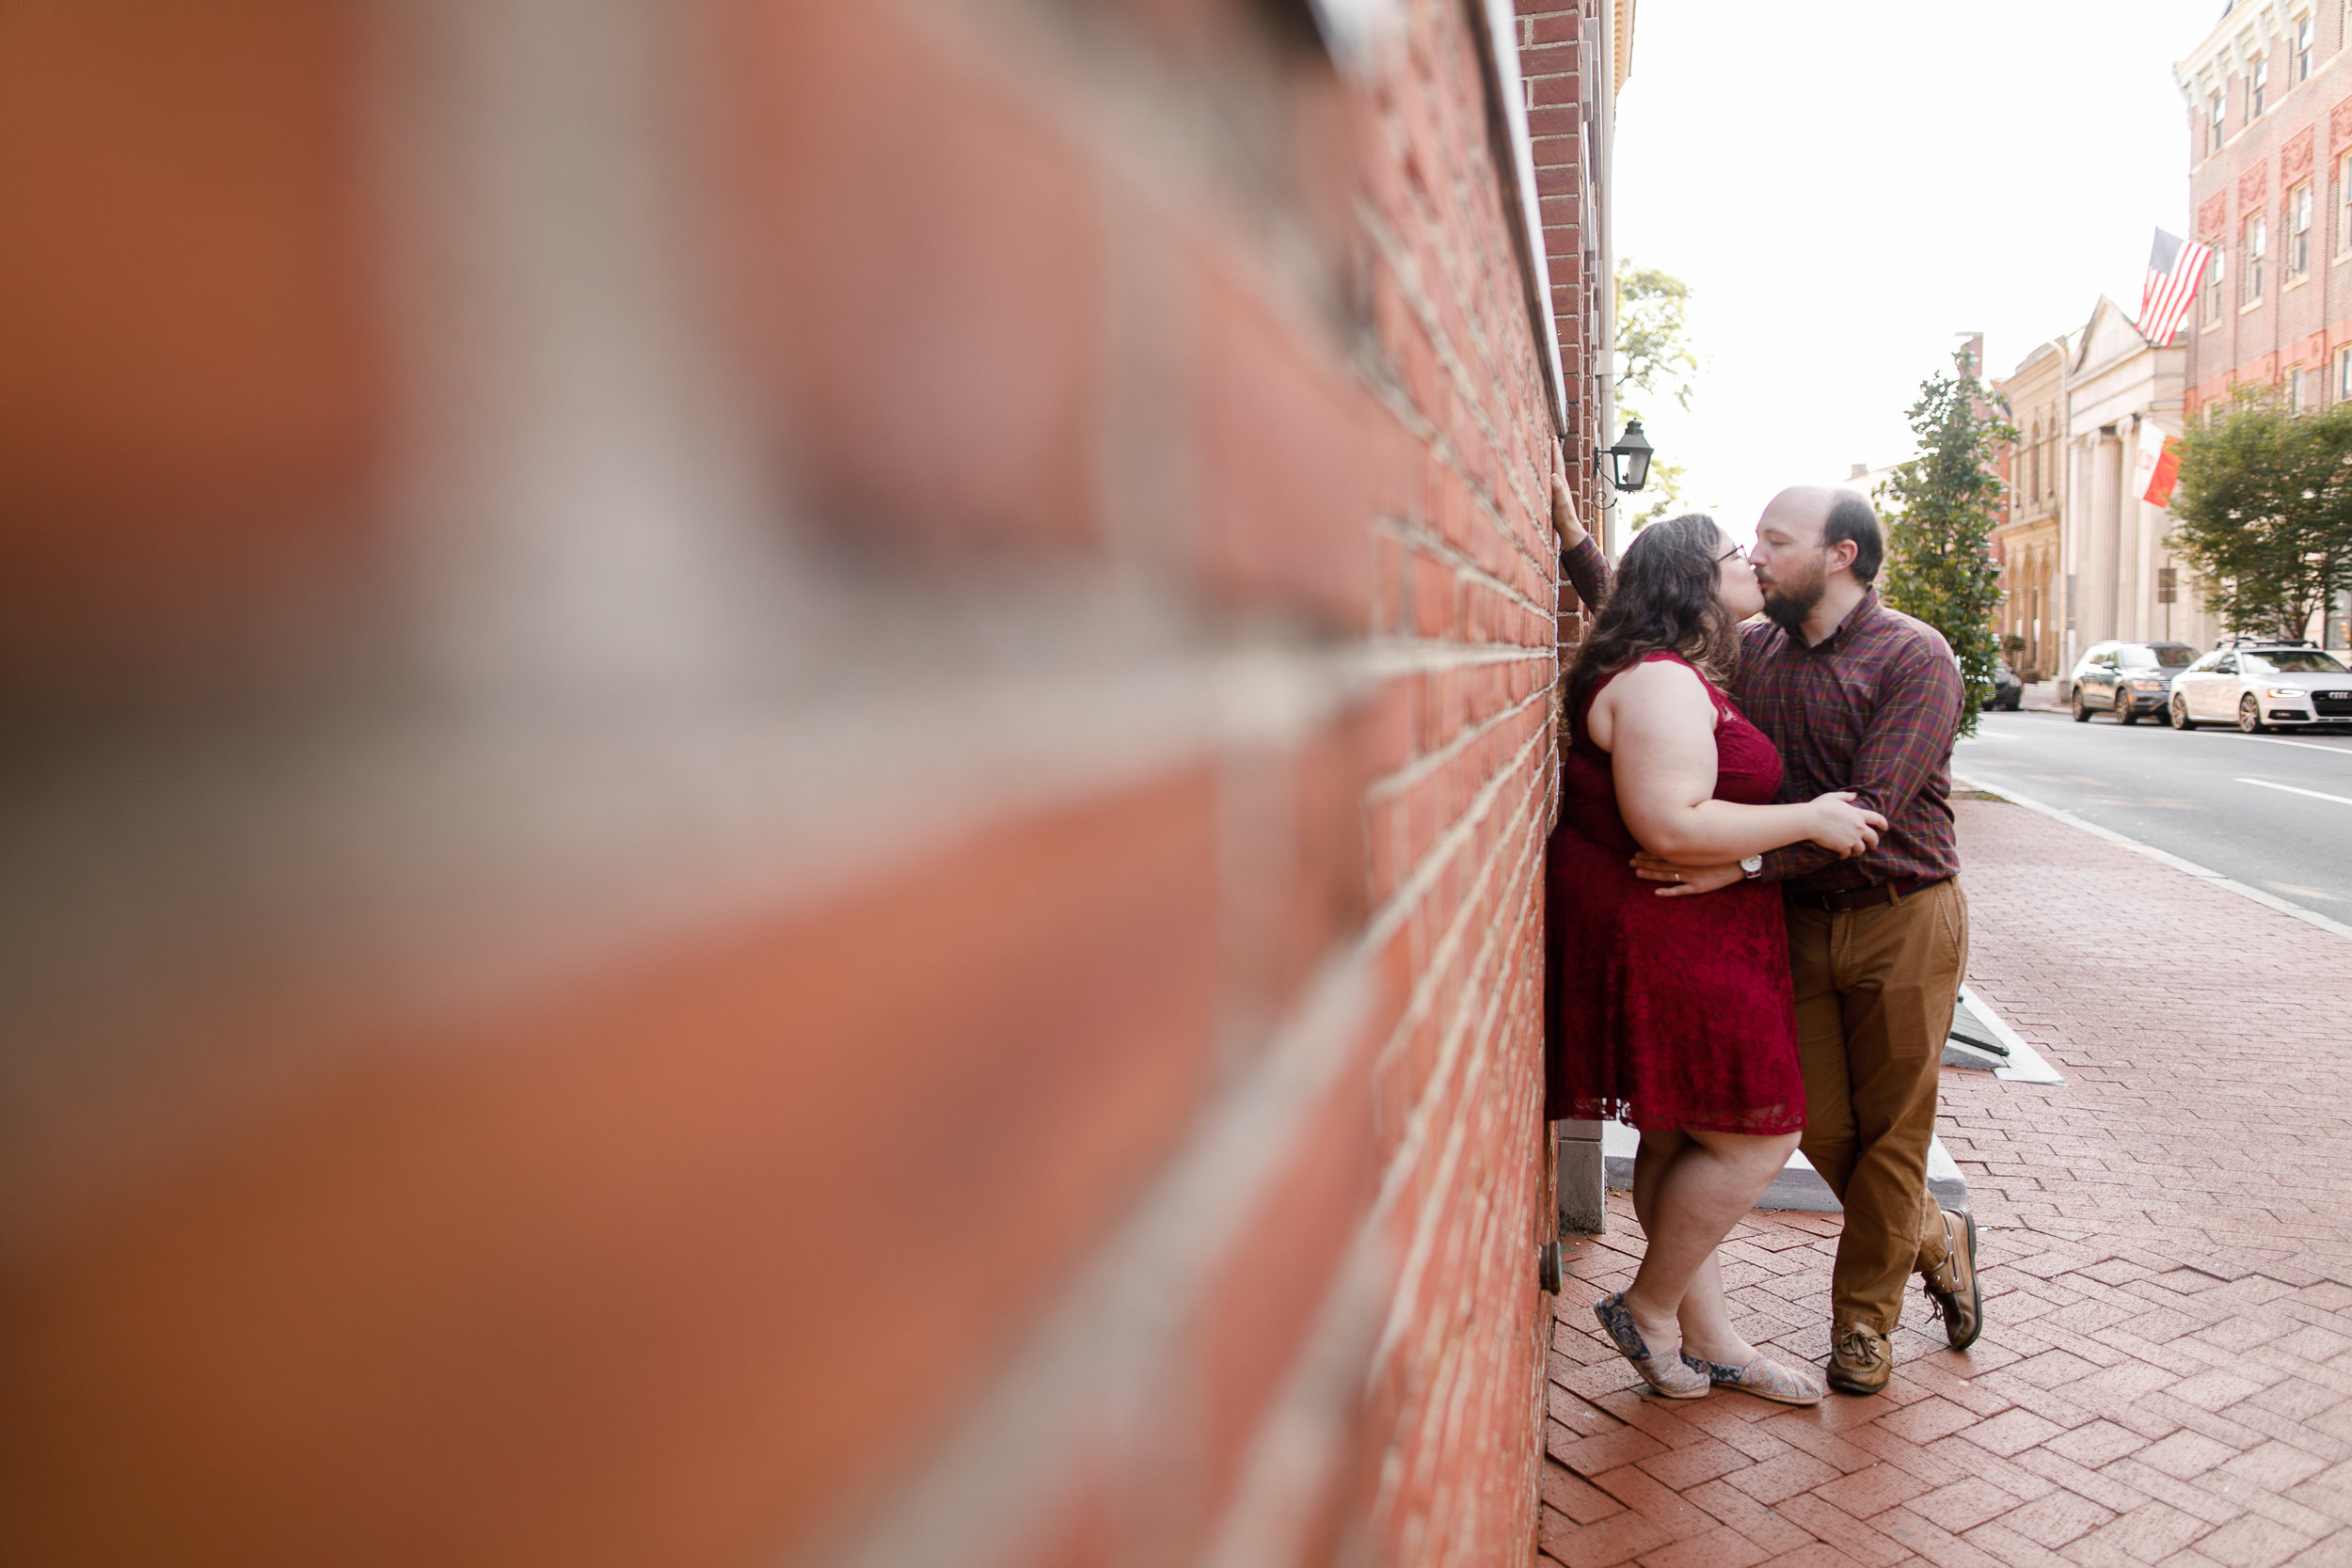 D&A Old City Philly Couples Session Photo Location Ideas 13.jpg